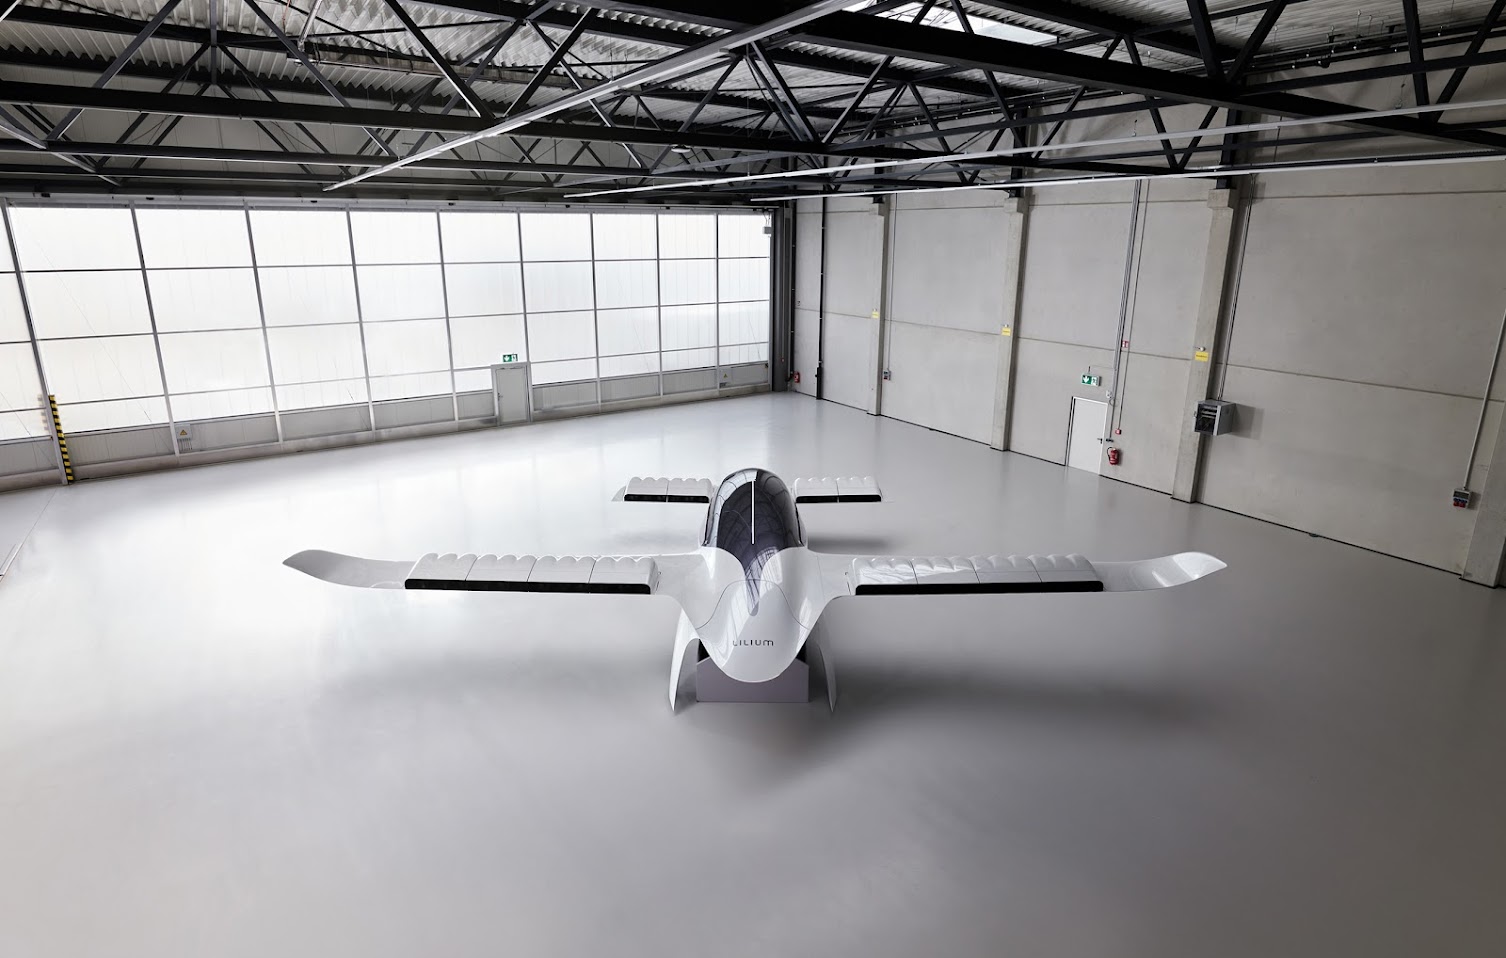 Full-scale model of the seven-seater Lilium jet.